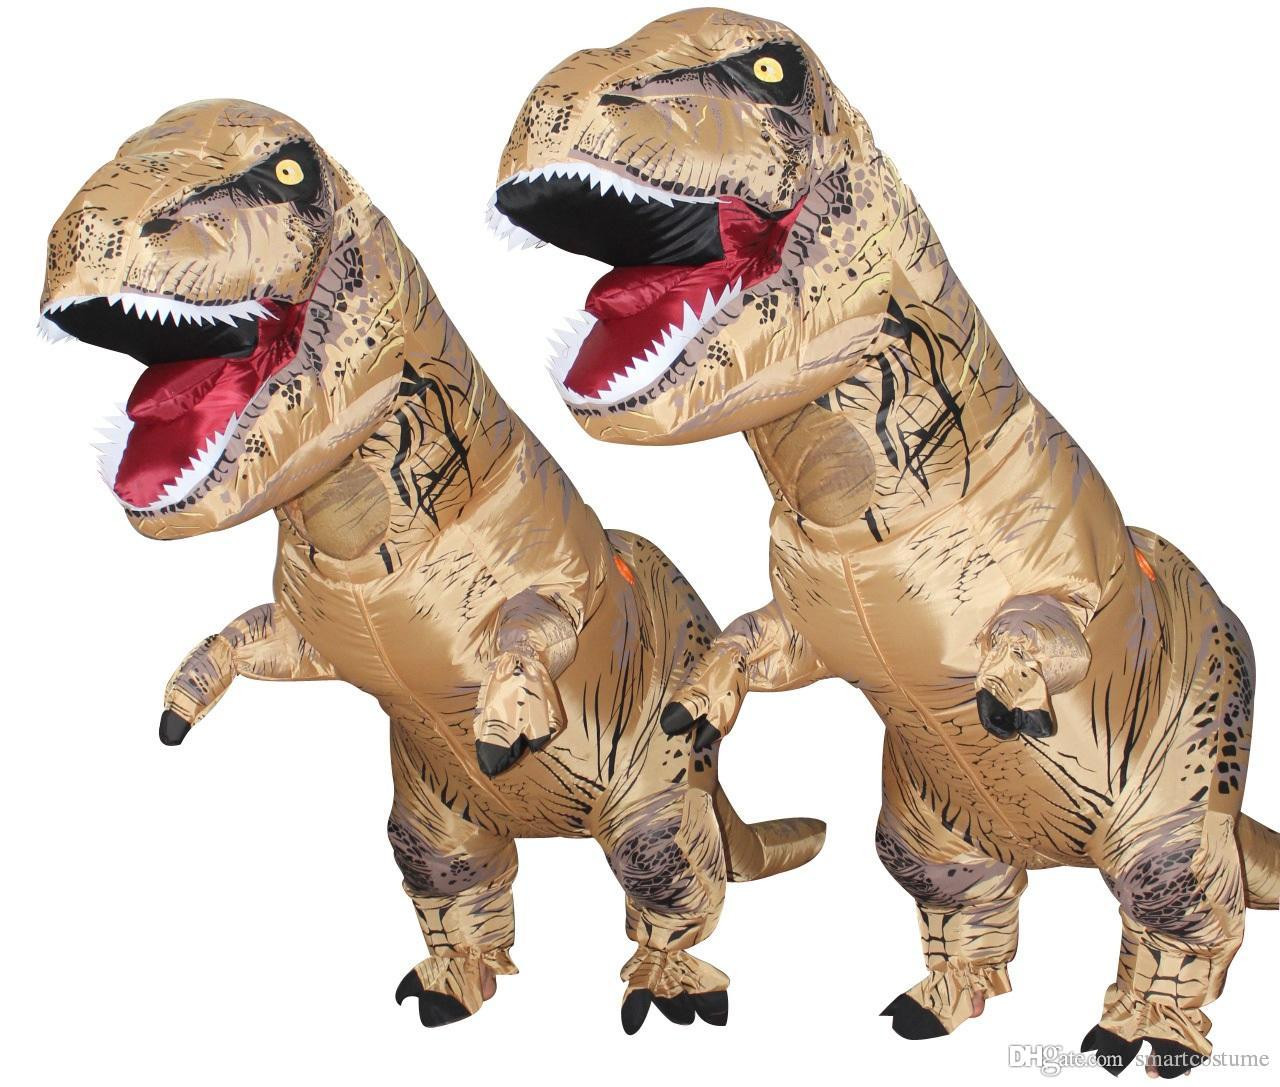 DIY Dinosaur Costume For Adults
 Fancy Dress Mascot Giant Inflatable Dinosaur Suit For